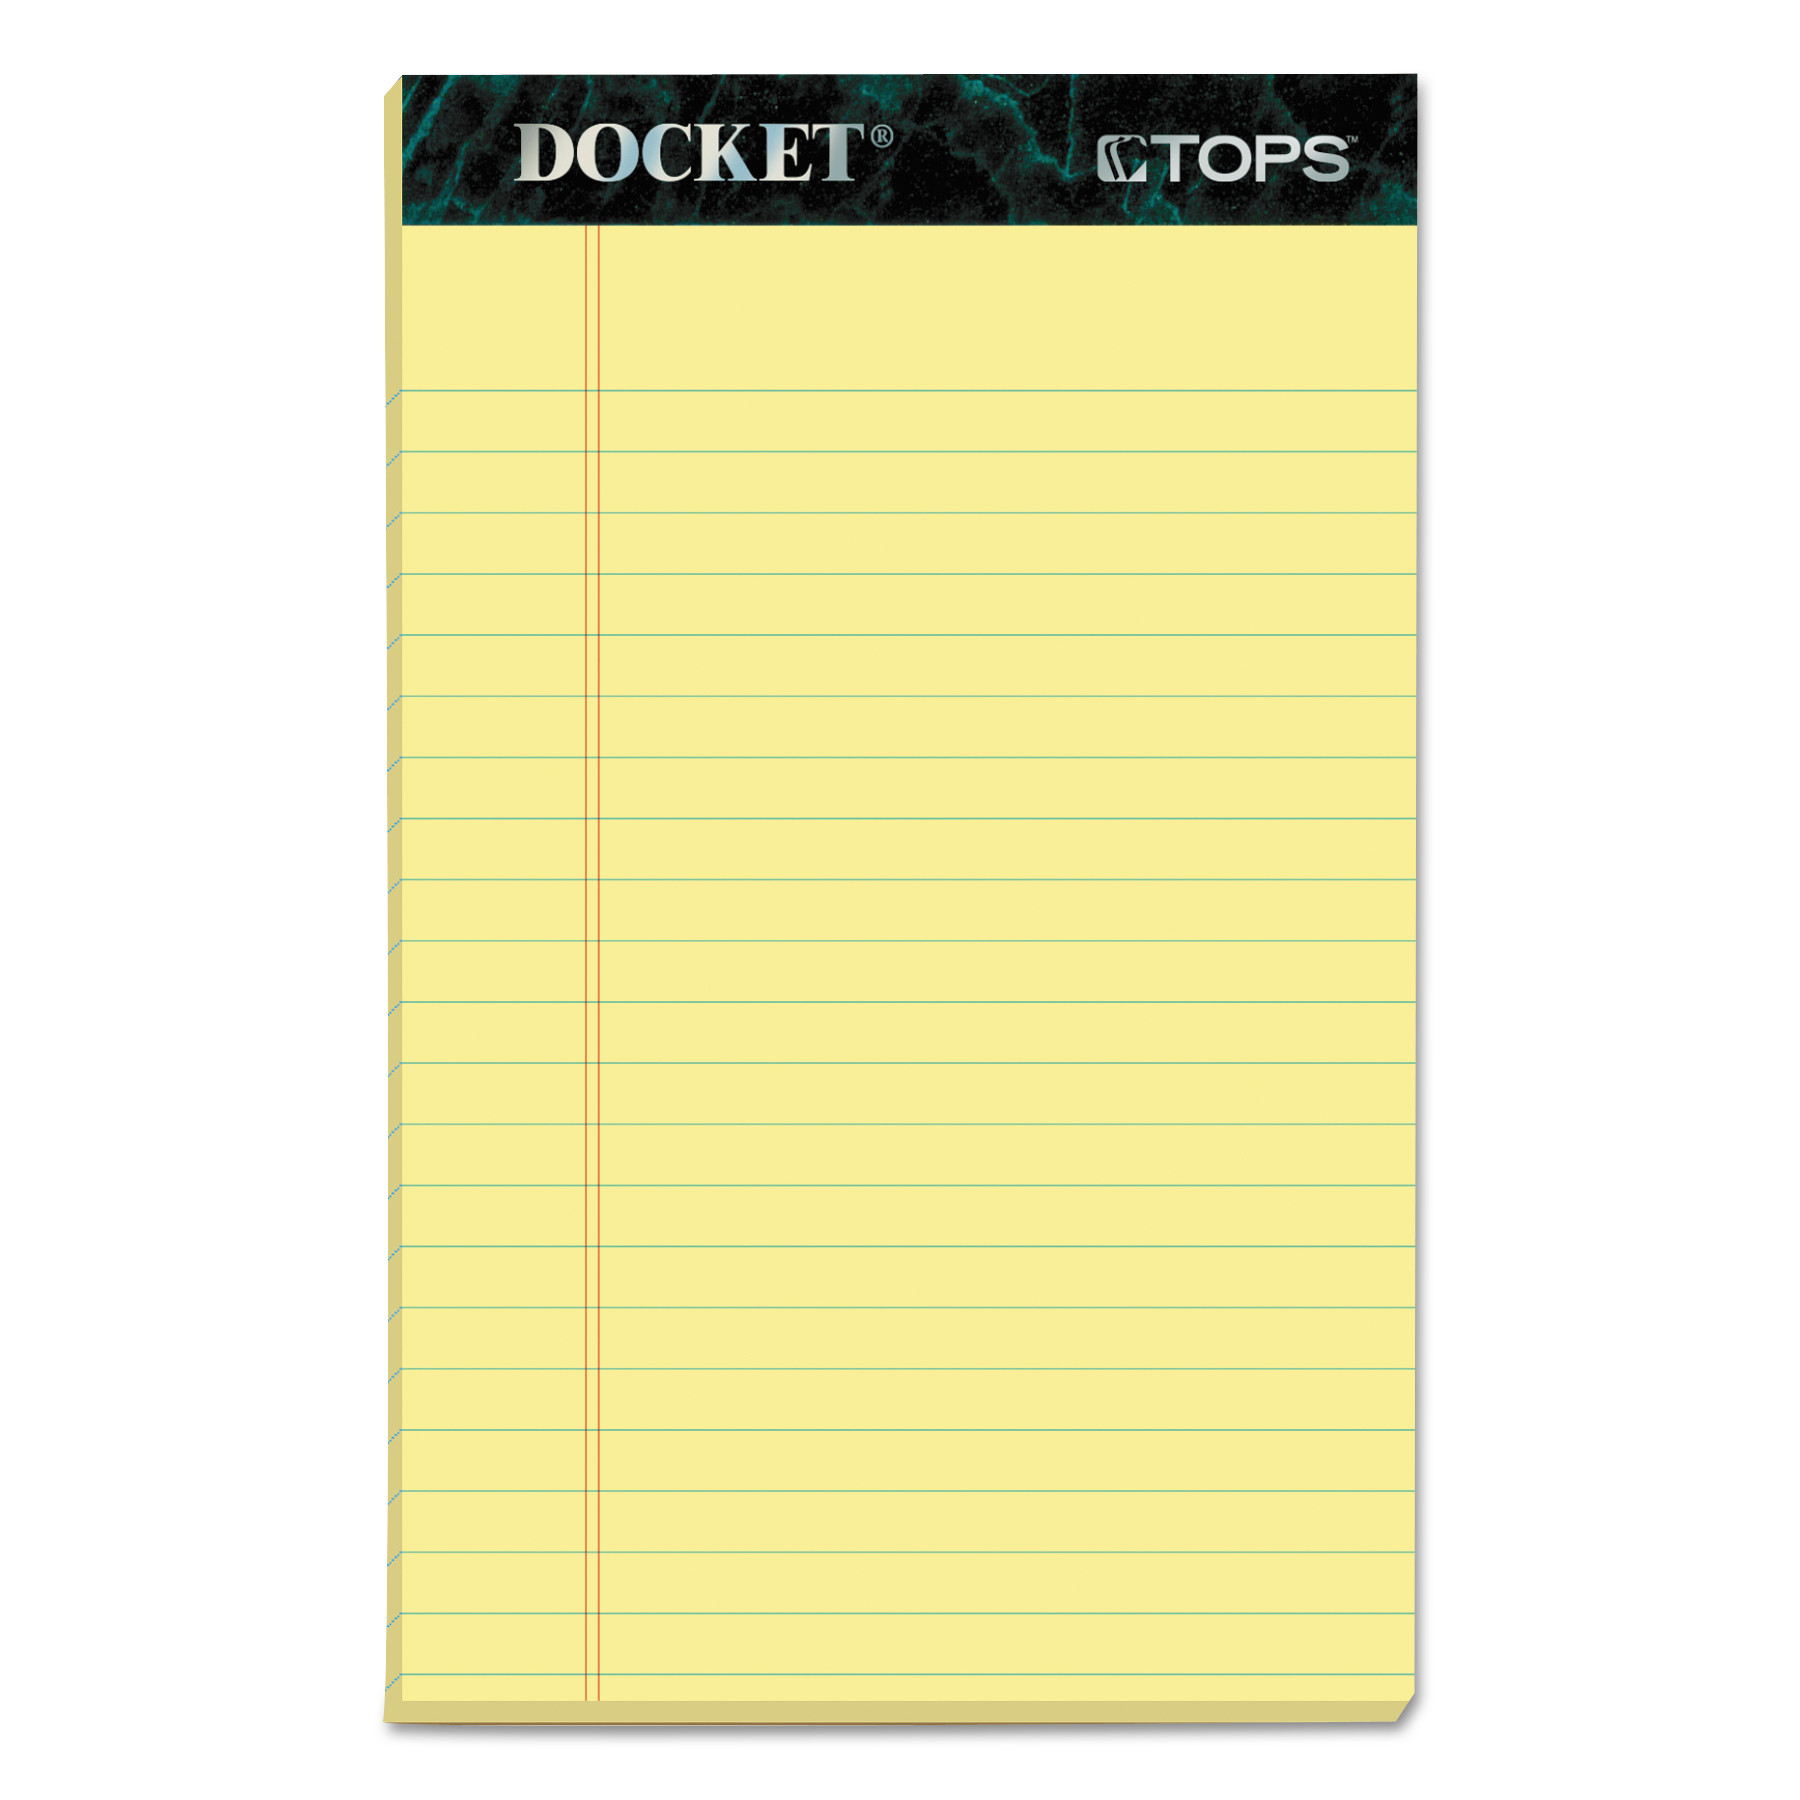  TOPS 63350 Docket Ruled Perforated Pads, Narrow Rule, 5 x 8, Canary, 50 Sheets, 12/Pack (TOP63350) 